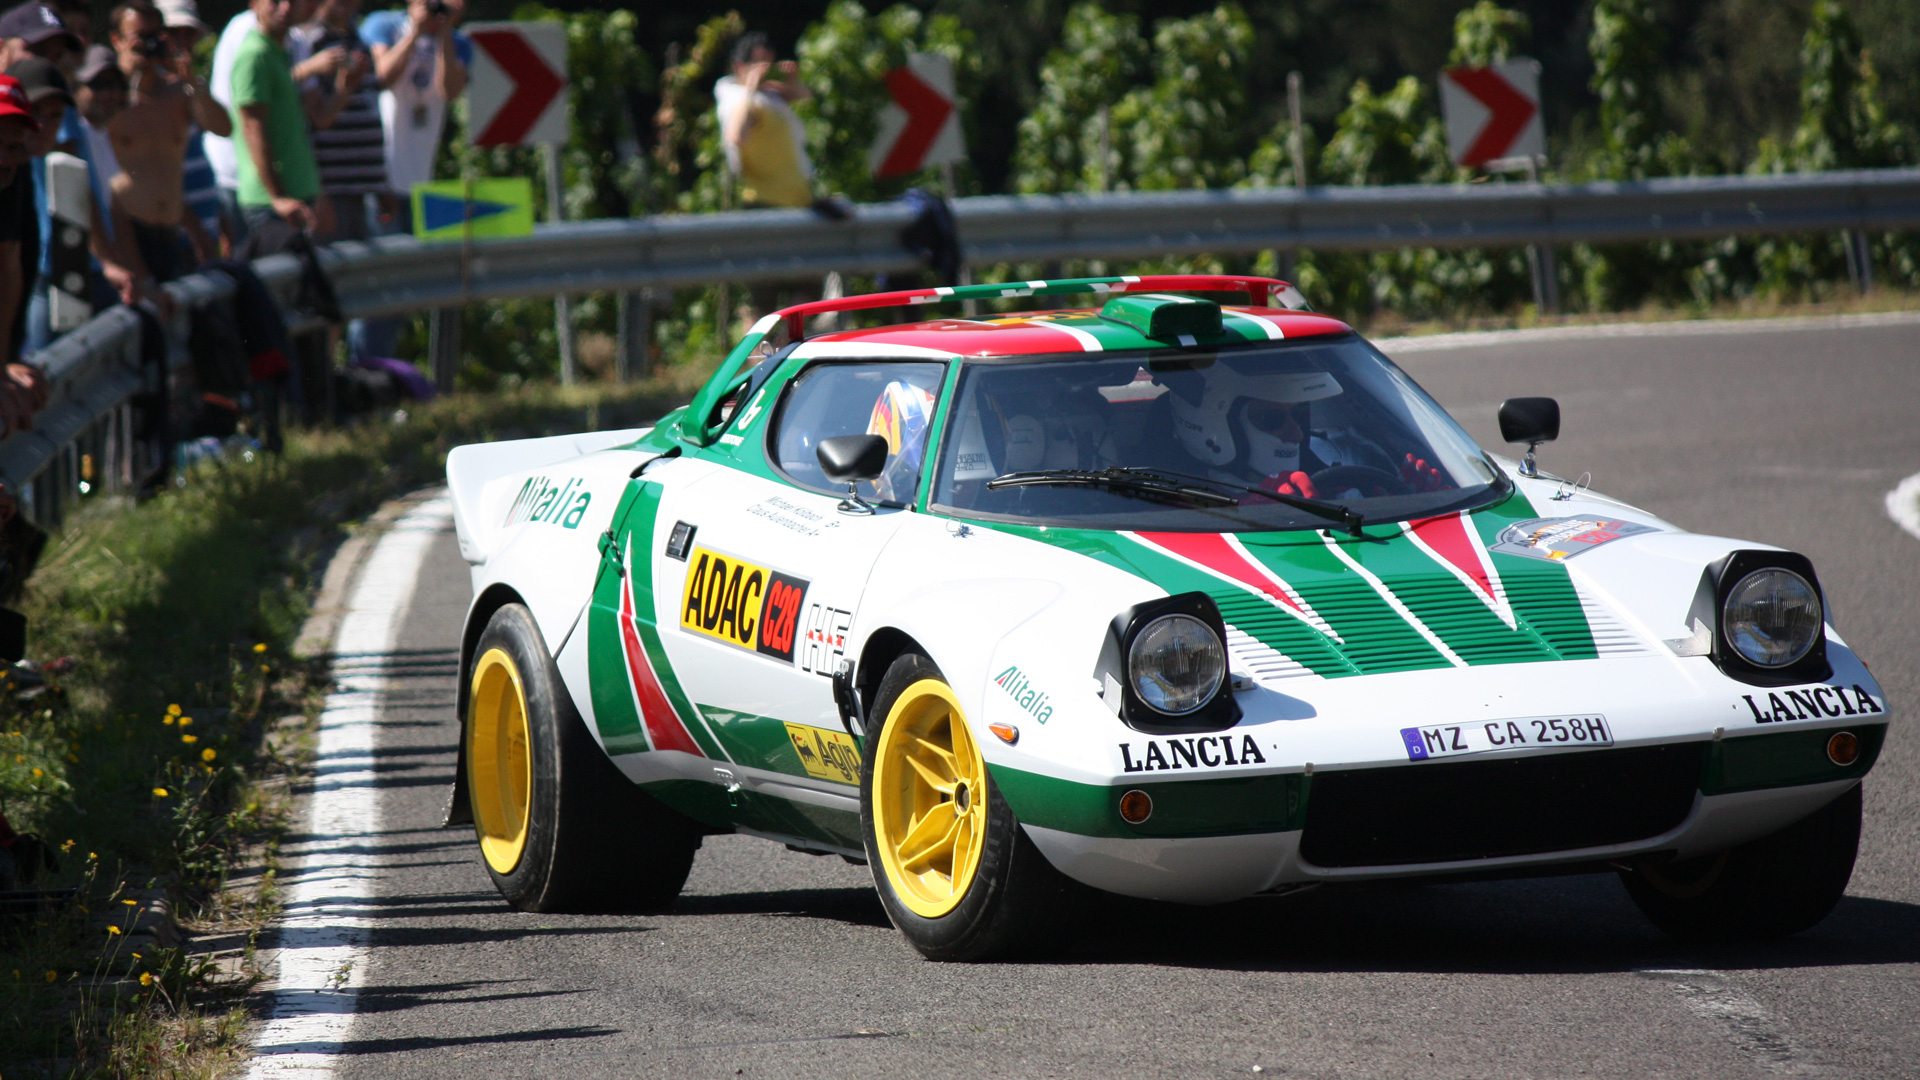 Lancia Stratos Car Racing Race Cars Pop Up Headlights Castrol Livery Colored Wheels 1920x1080